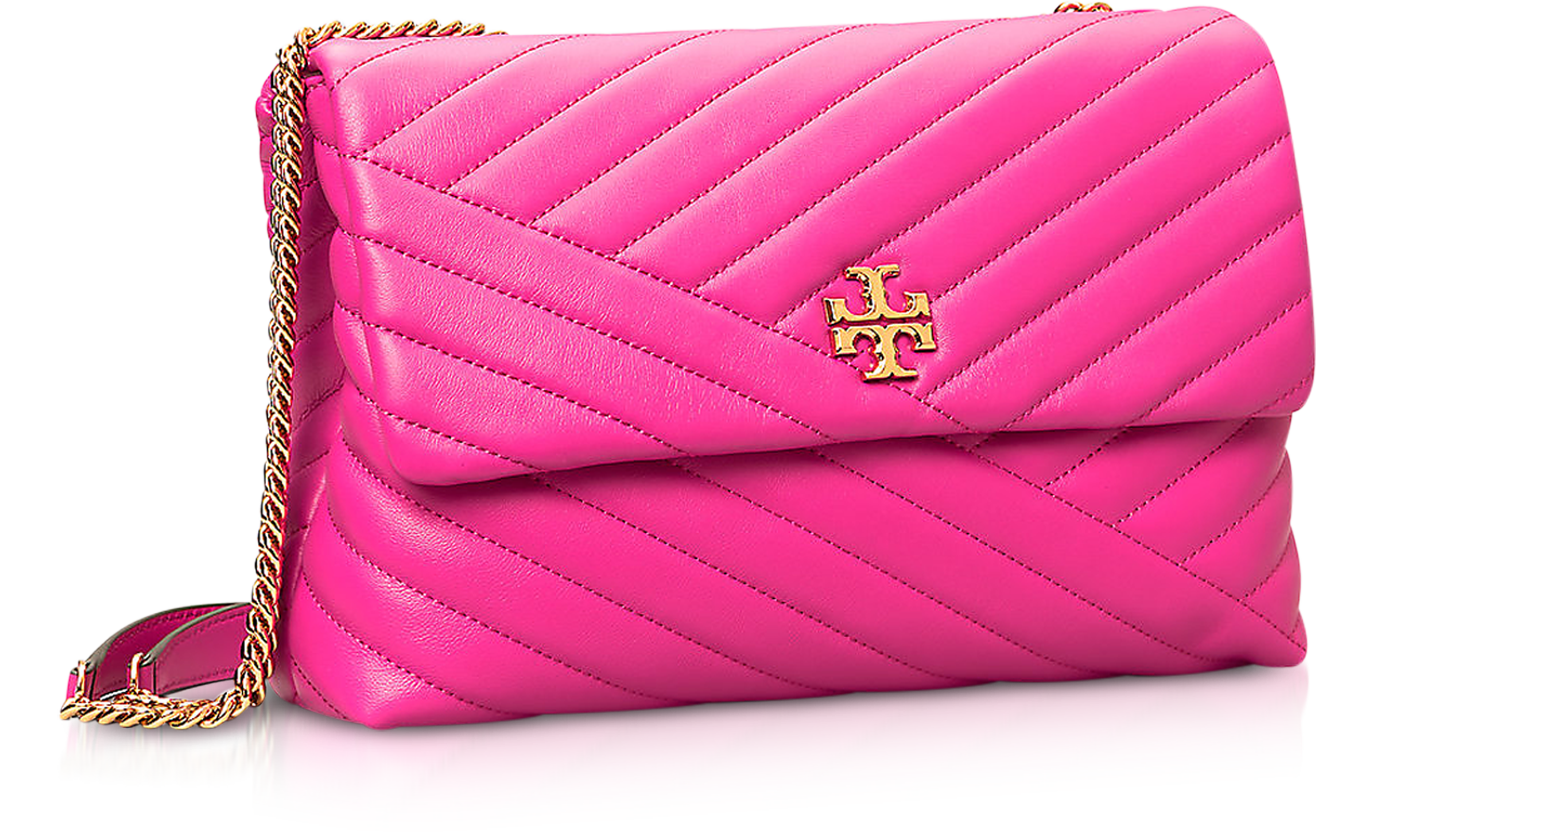 TORY BURCH KIRA BAG CHEVRON QUILTED LEATHER CONVERTIBLE SHOULDER BAG CRAZY  PINK REVEAL 